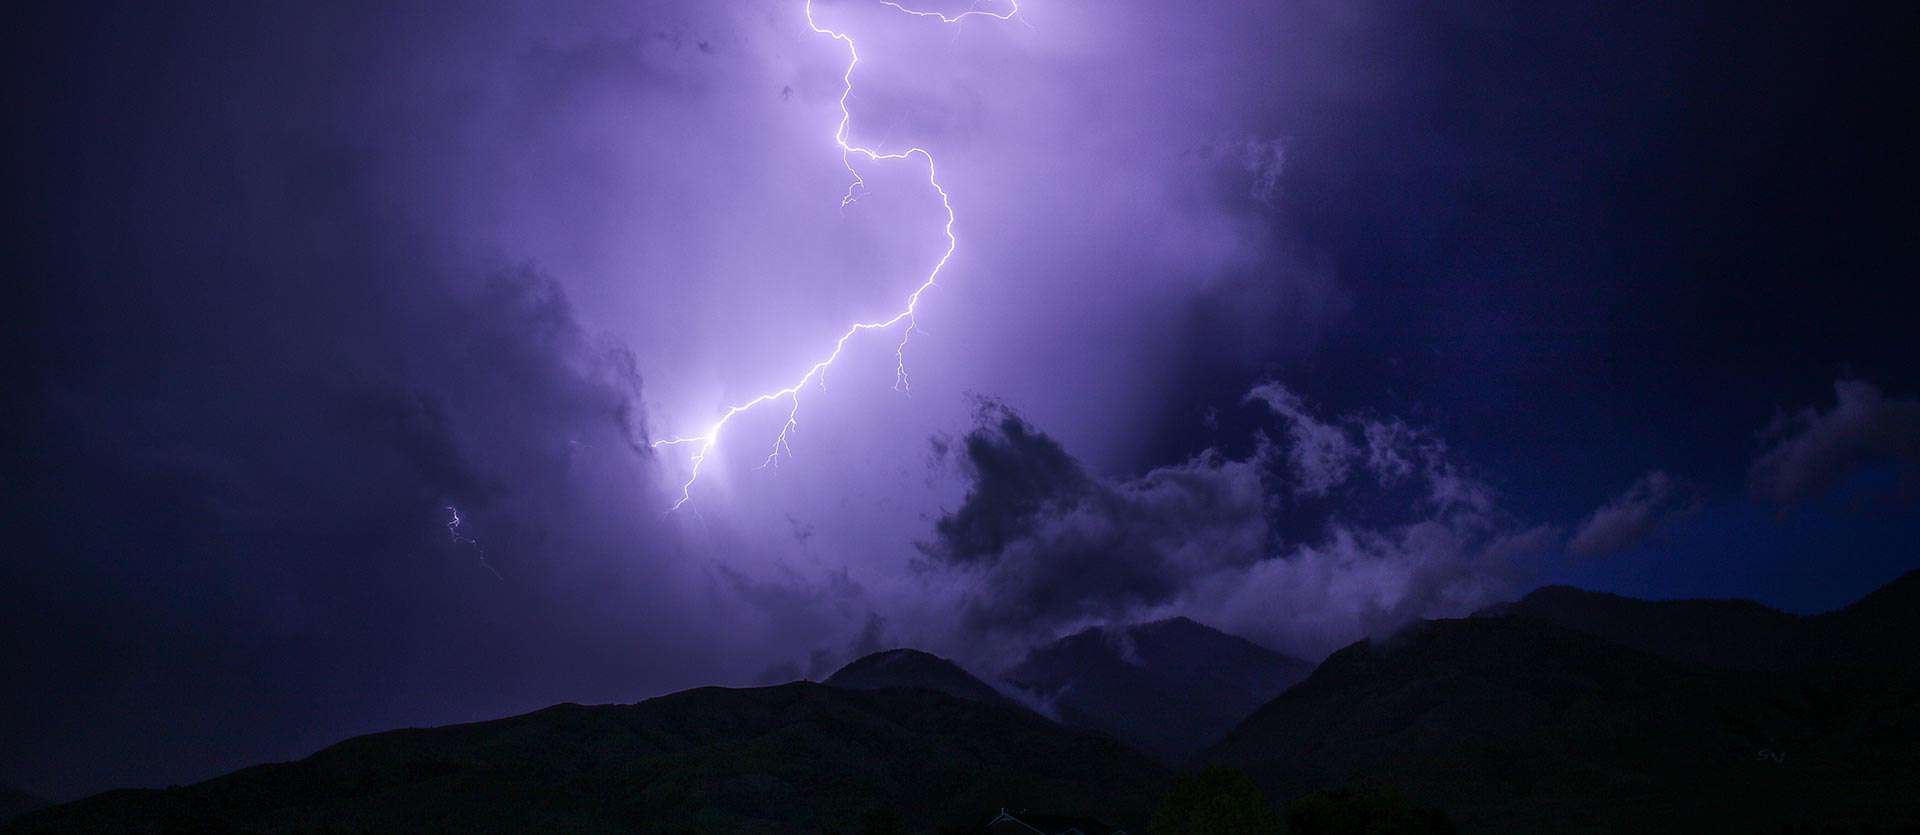 Summer lightning over Rockies proves deadly, but Colorado hikers